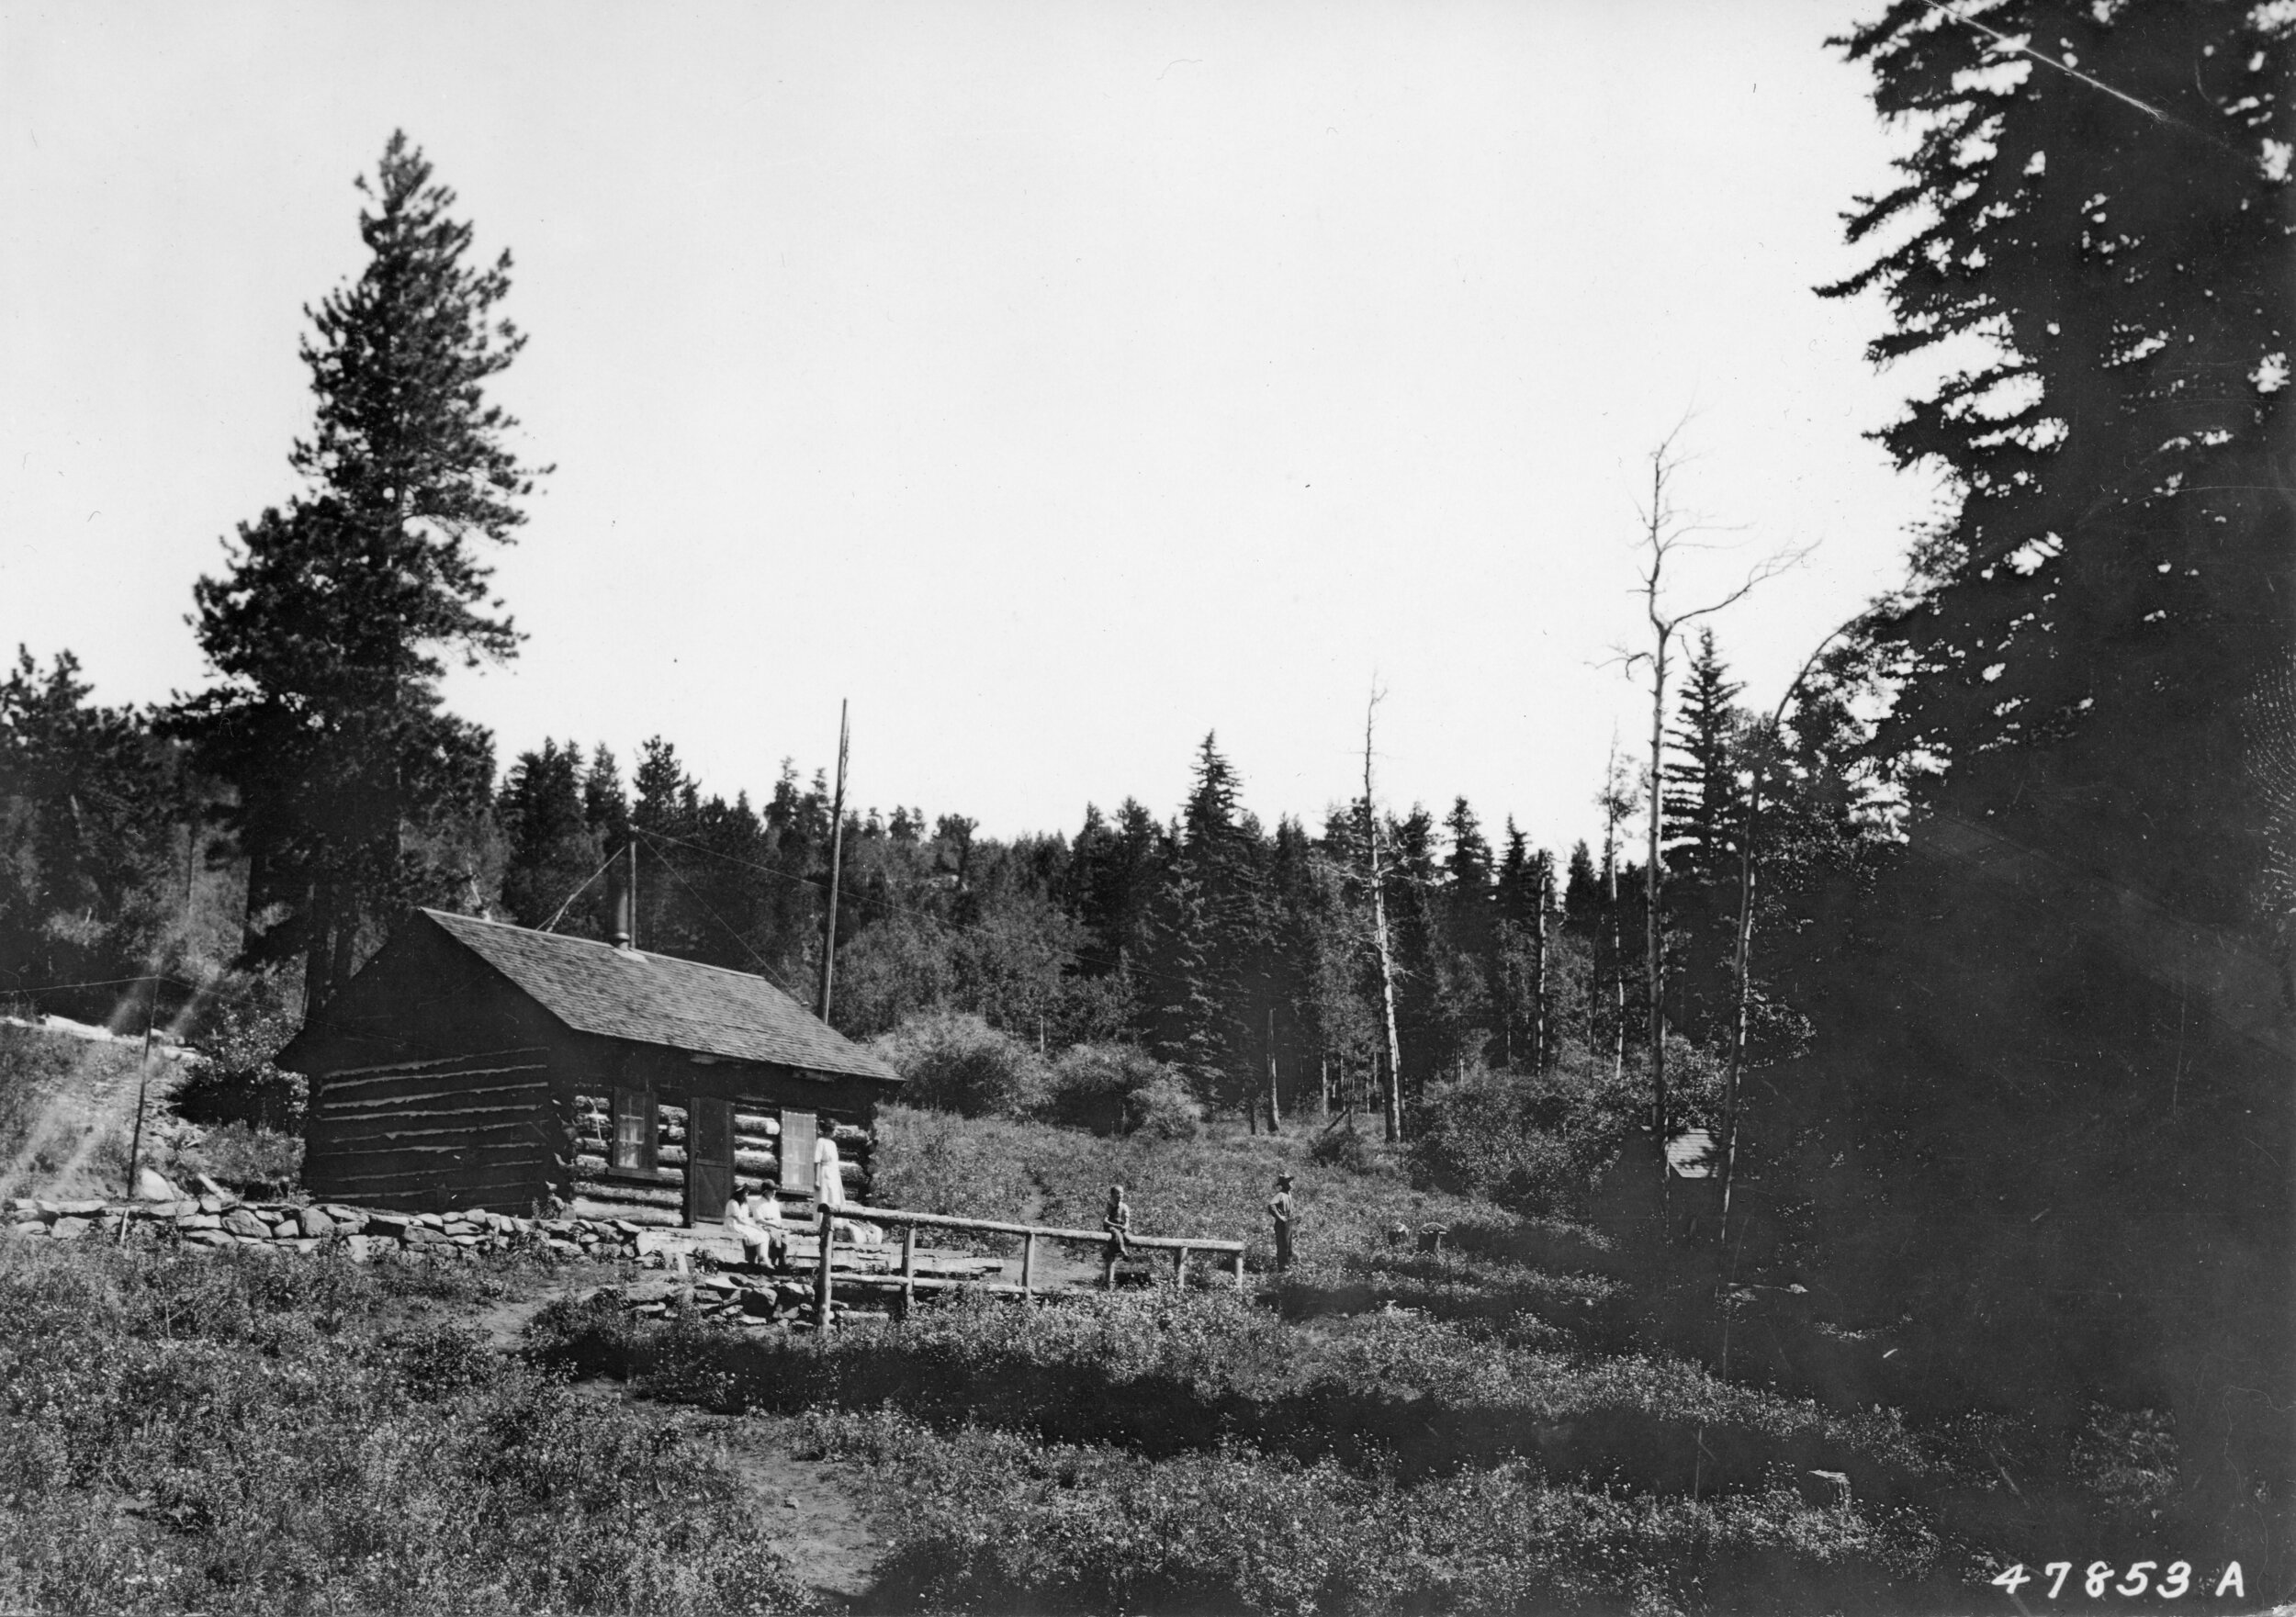  This 1920 photo shows the Bear Creek Ranger Station, built in 1906 on land leased from the General Land Office (now the Bureau of Land Management). In the 1970s when the lease ended, the BLM could not maintain the building and it (and the horse barn